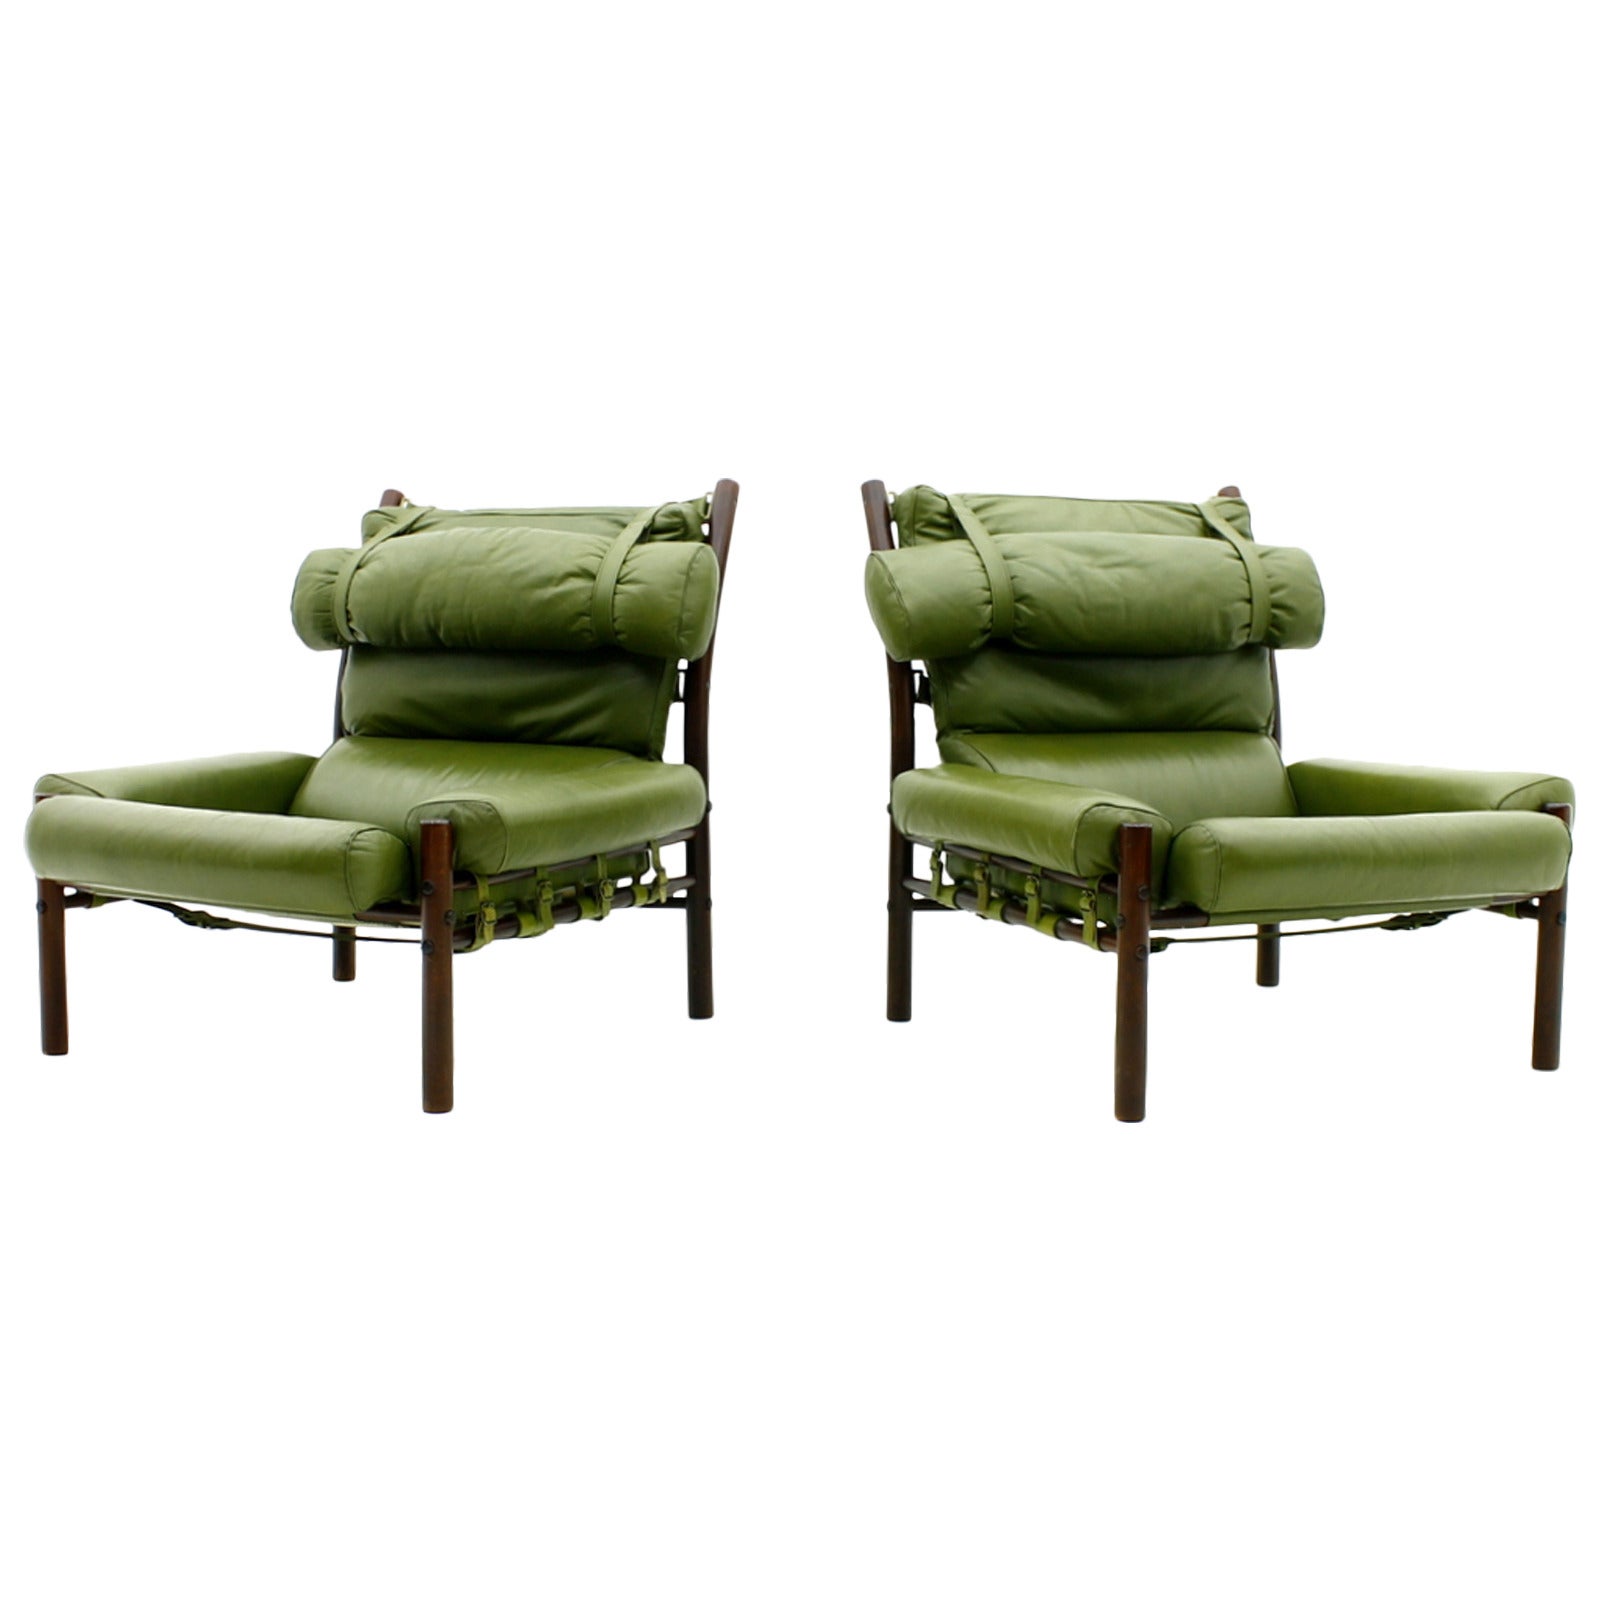 Pair of Arne Norell Lounge Chairs "Inca, " Rosewood and Leather, Sweden, 1965